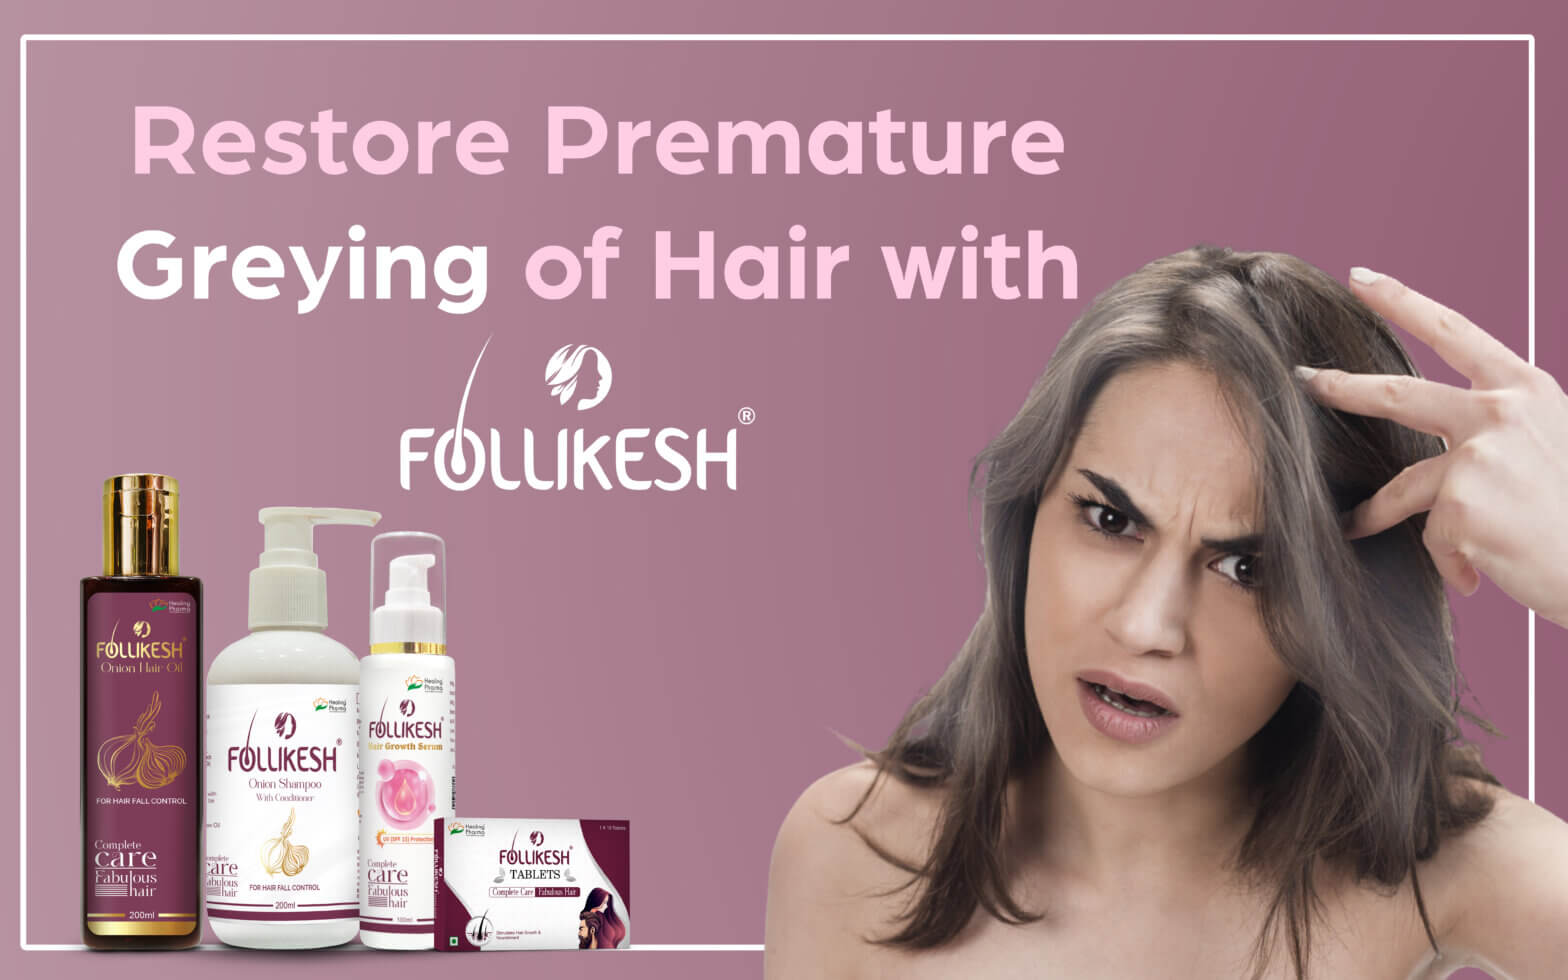 Greying of Hair with Follikesh